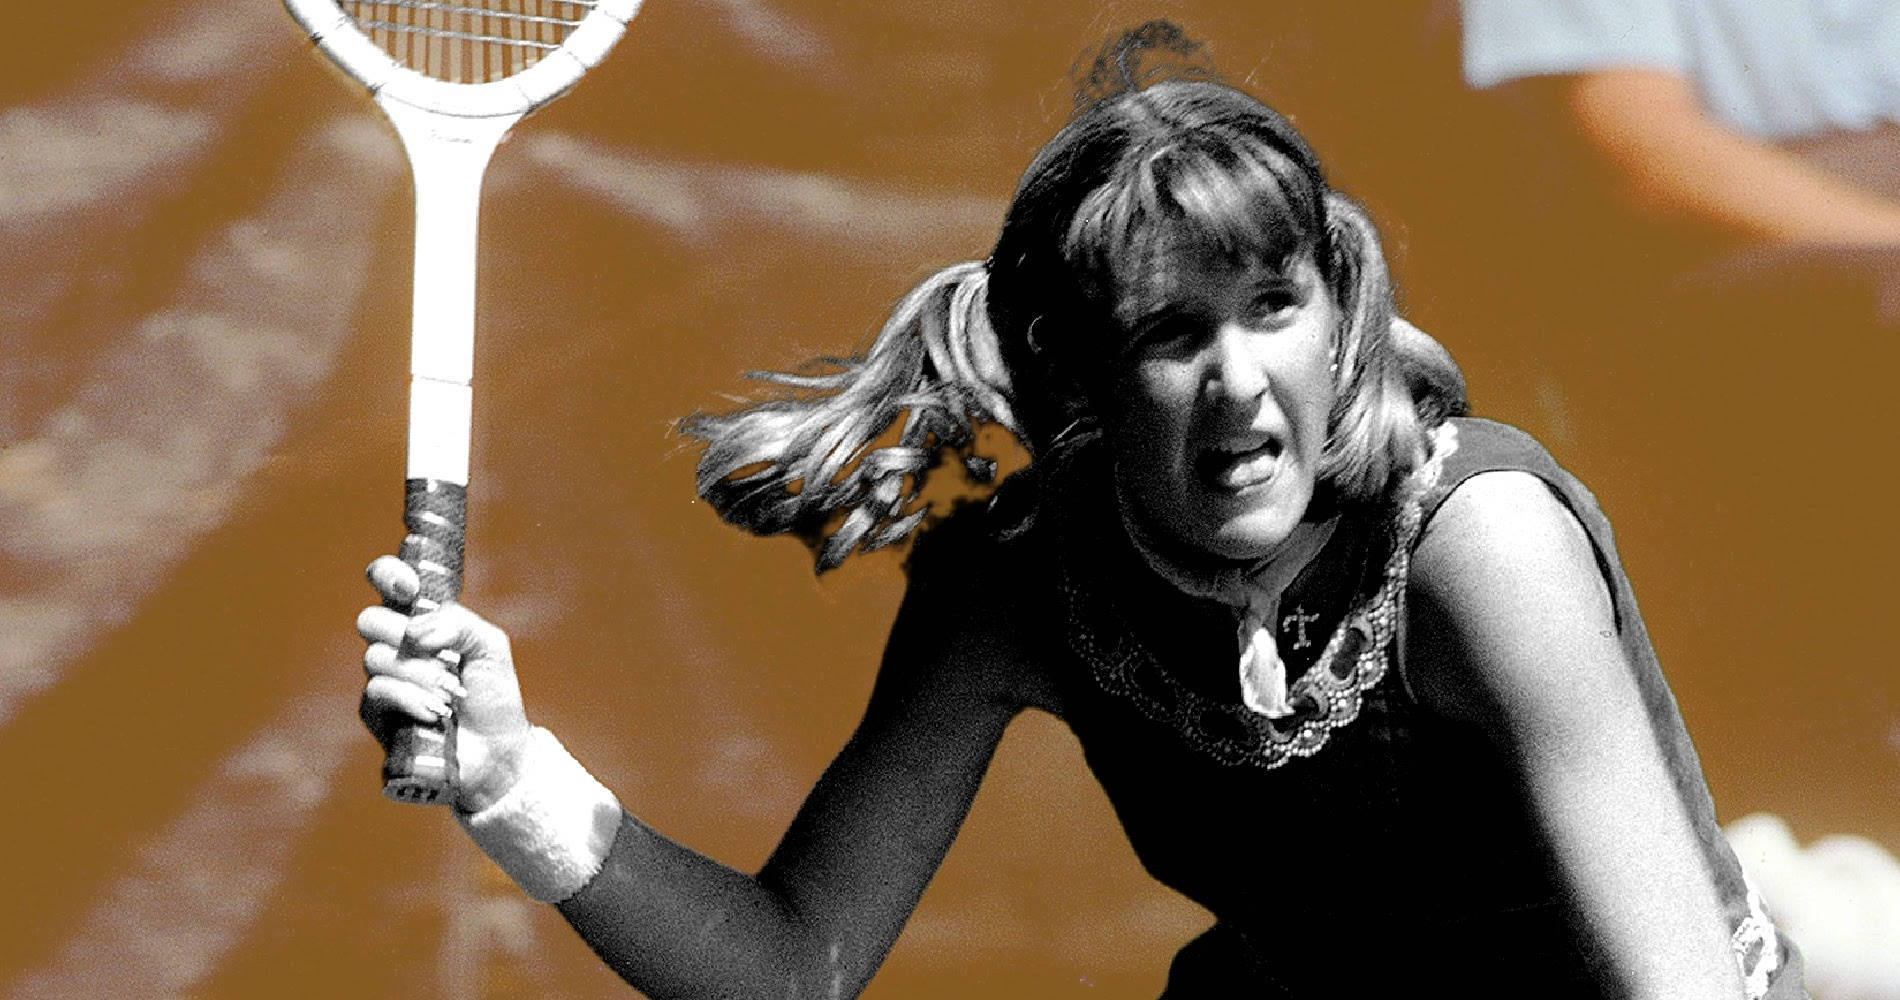 Legendary Tennis Player Tracy Austin Against Brown Background Wallpaper